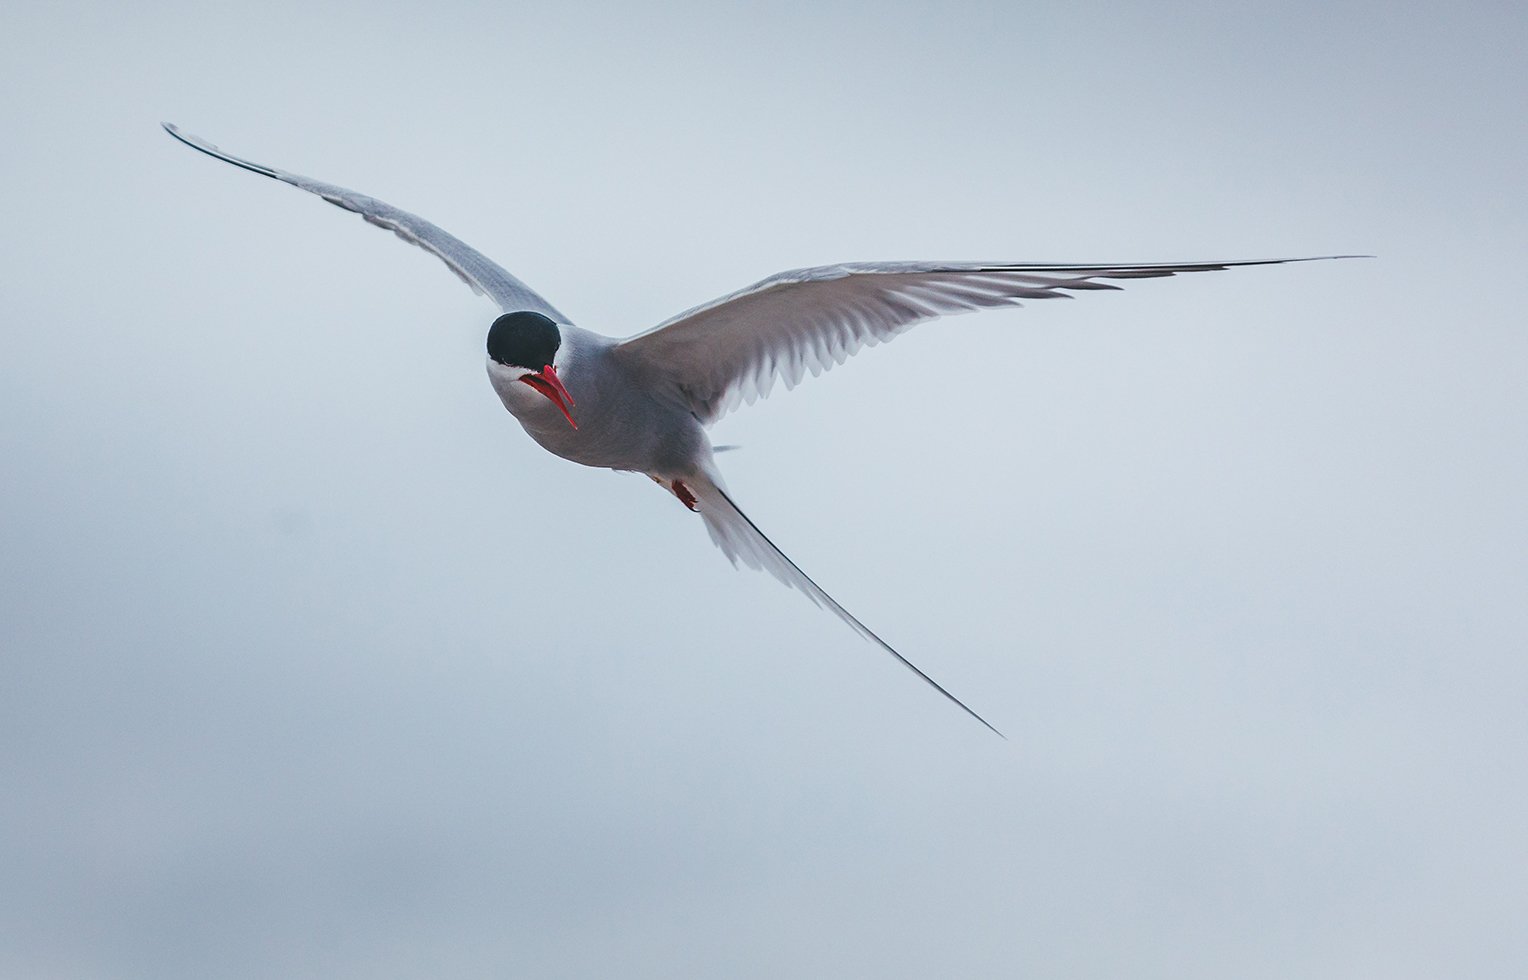 rctic terns&apos; annual migratory route ranges from 44,000 to 59,000 miles . Their migration is the longest of any bird species on the planet.